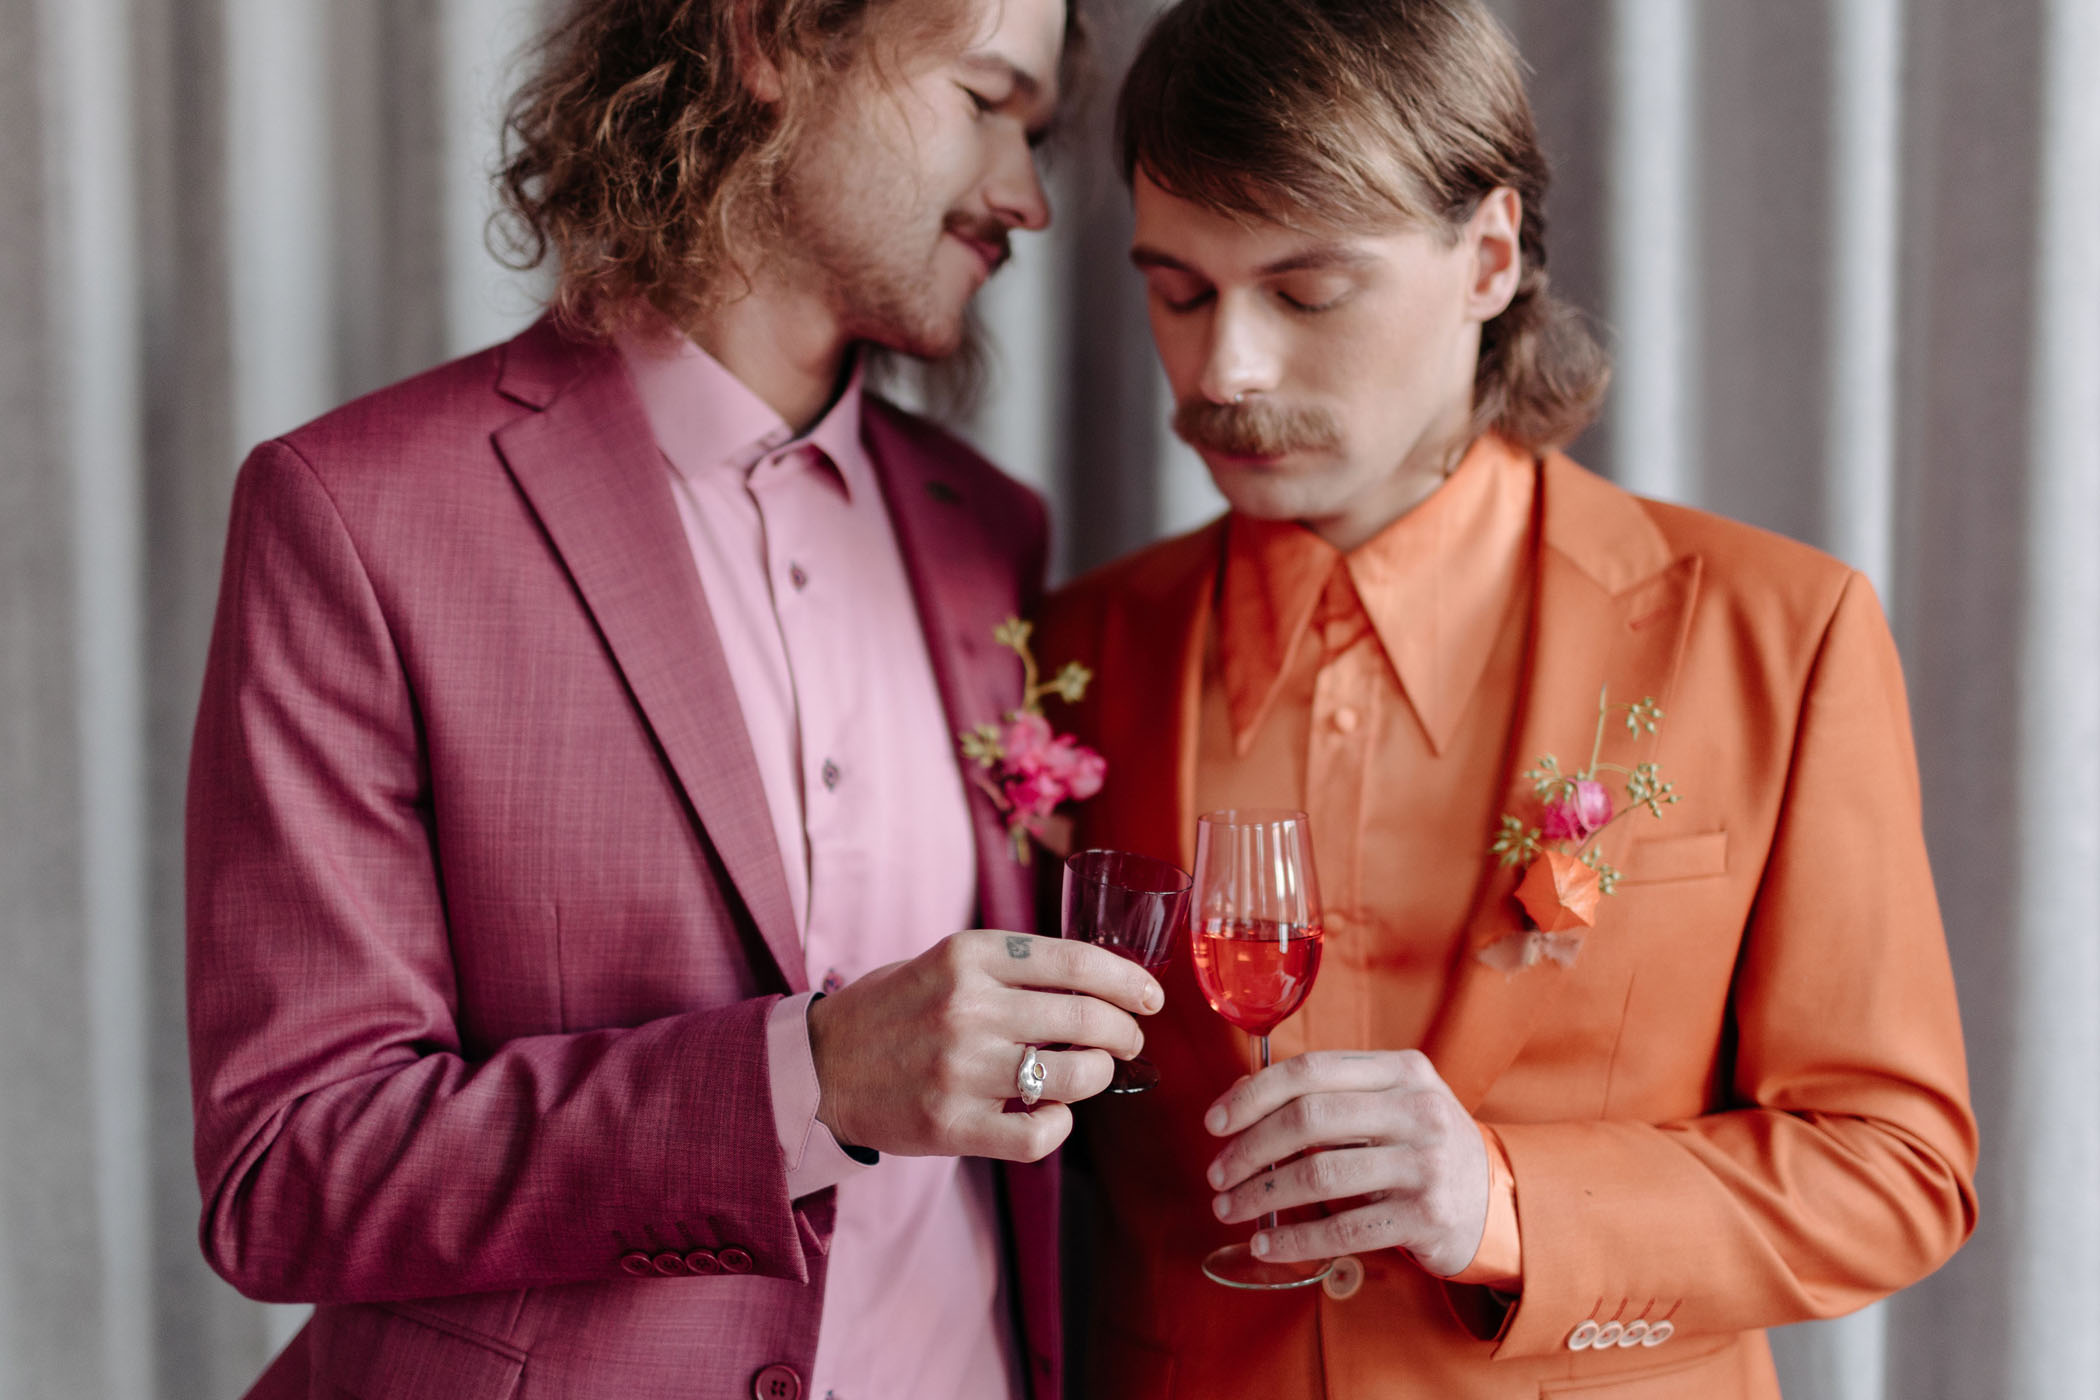 Finding Love in a Quirky World: A Political and Emotional Styled Shoot with Wes Anderson Vibes